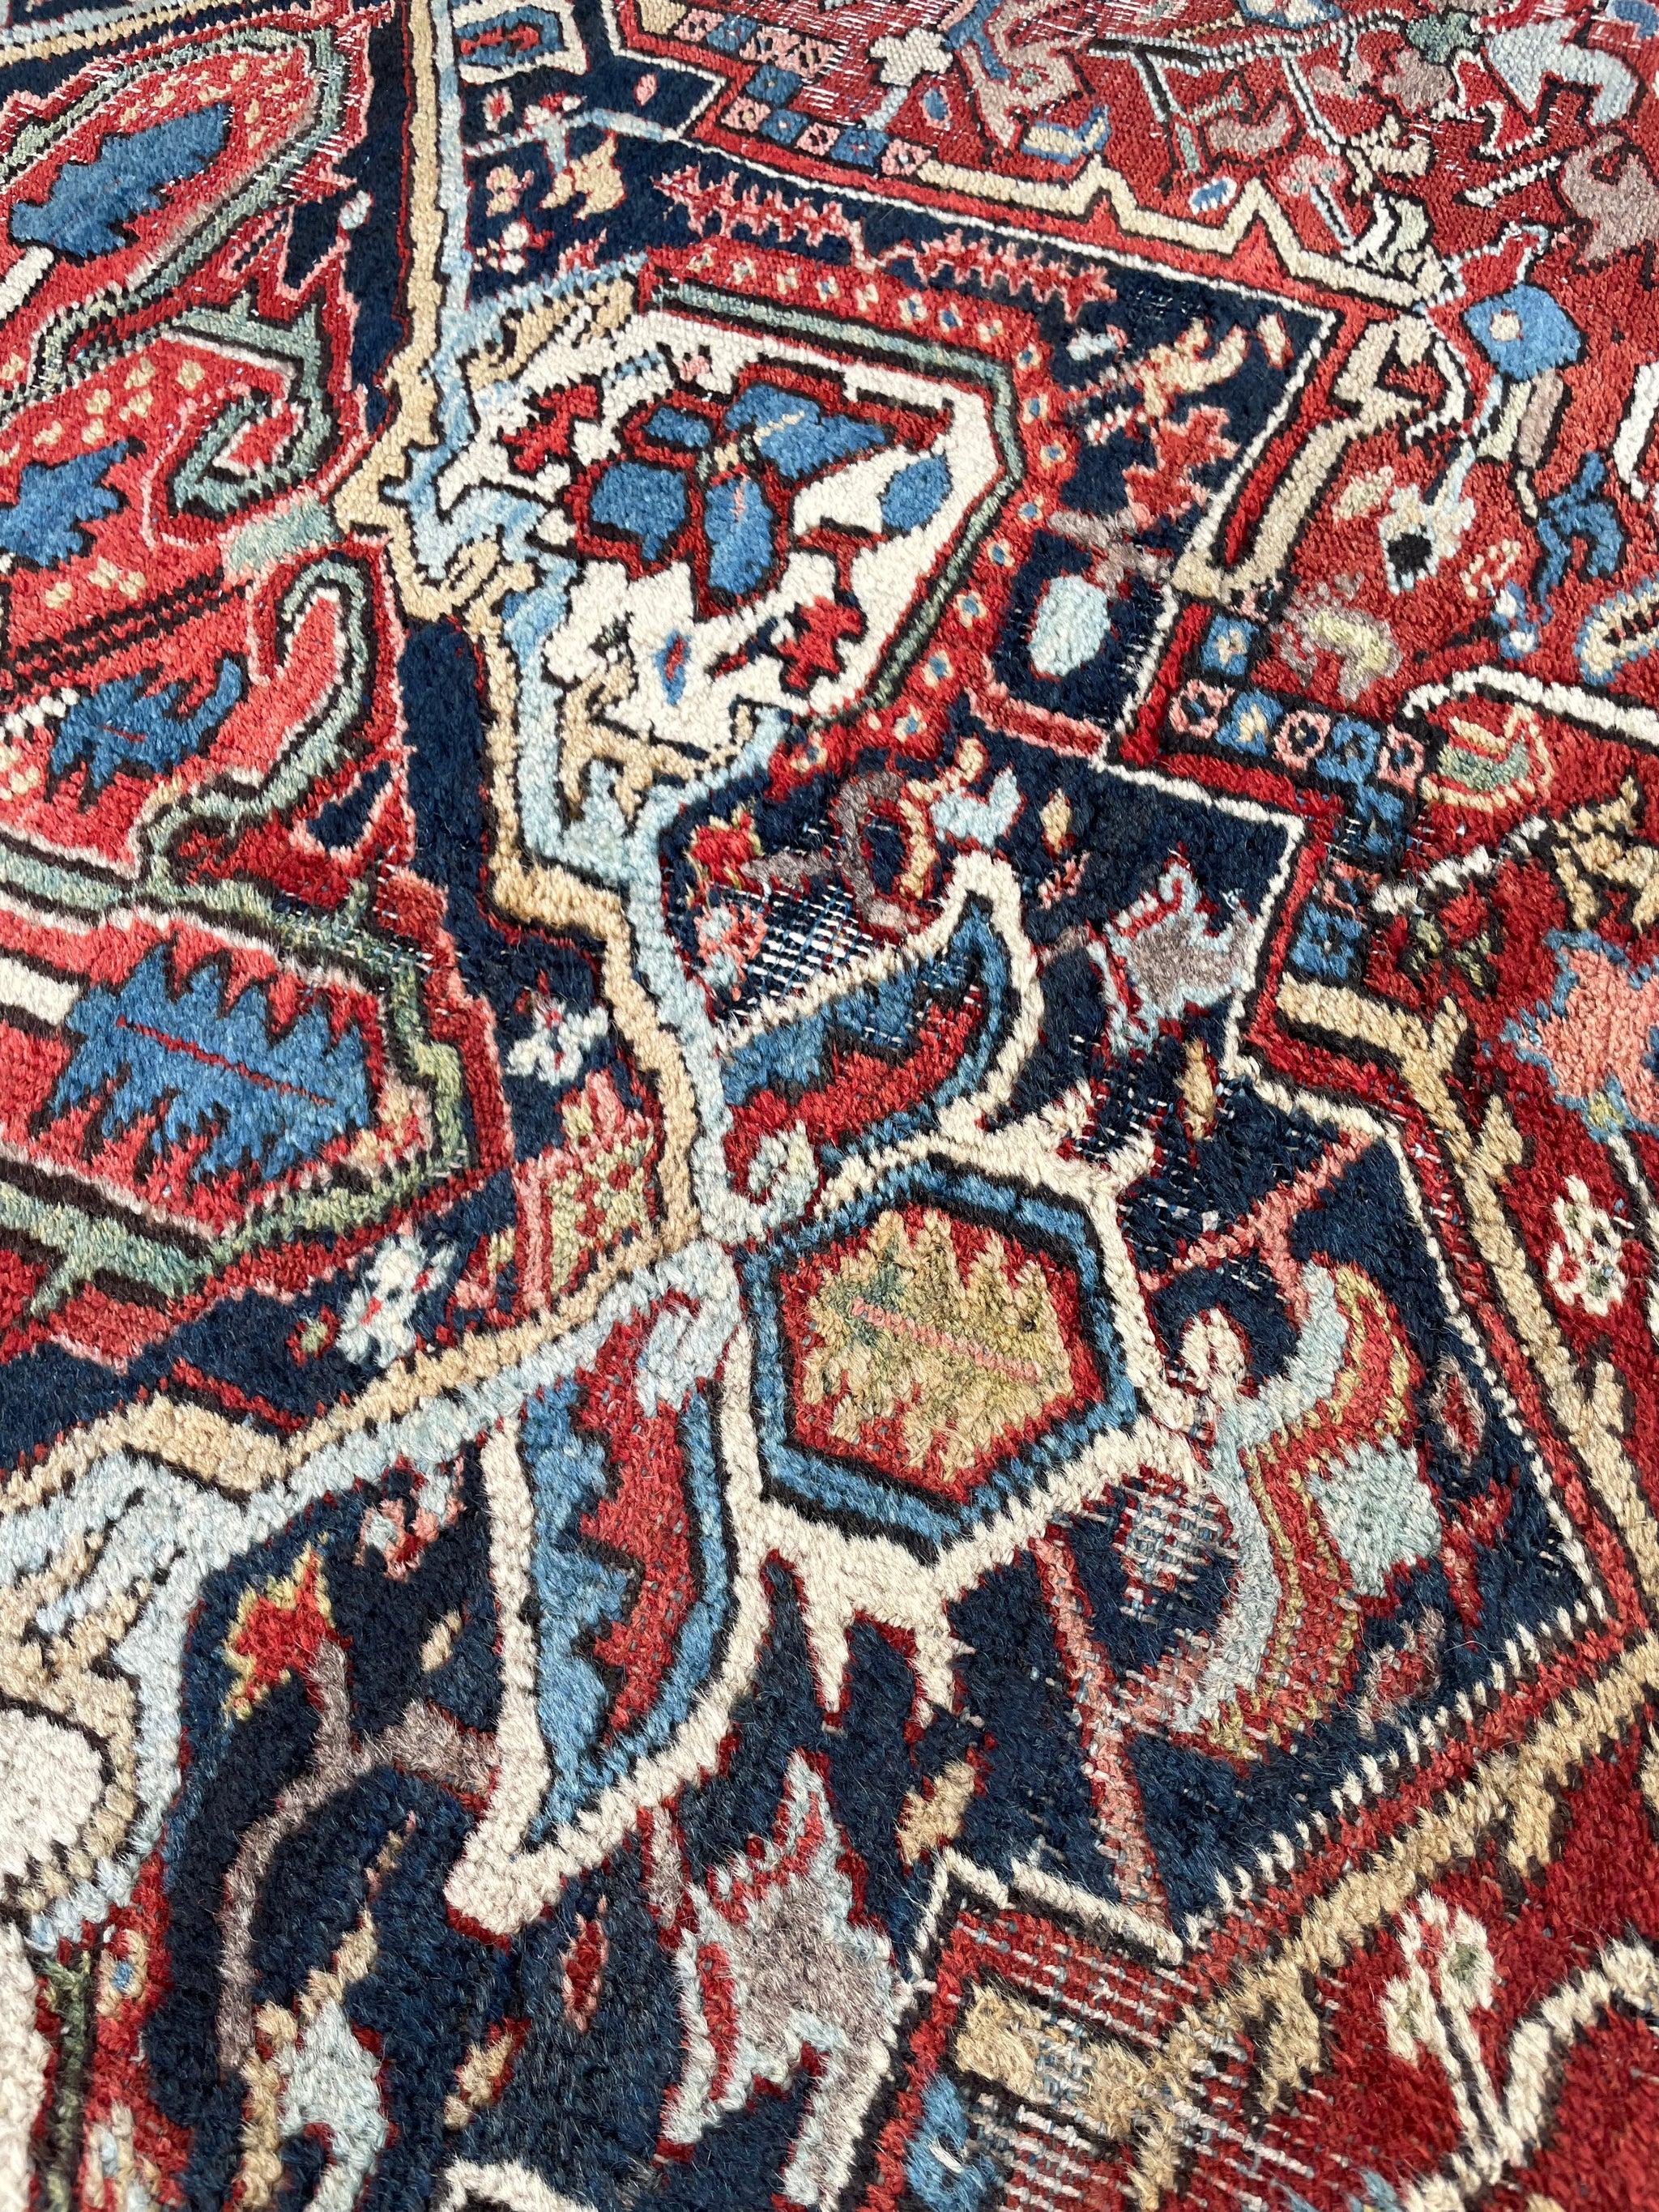 Sensational Antique Rug with Water Blue Corners, Greens, & Corals, c.1930's 14